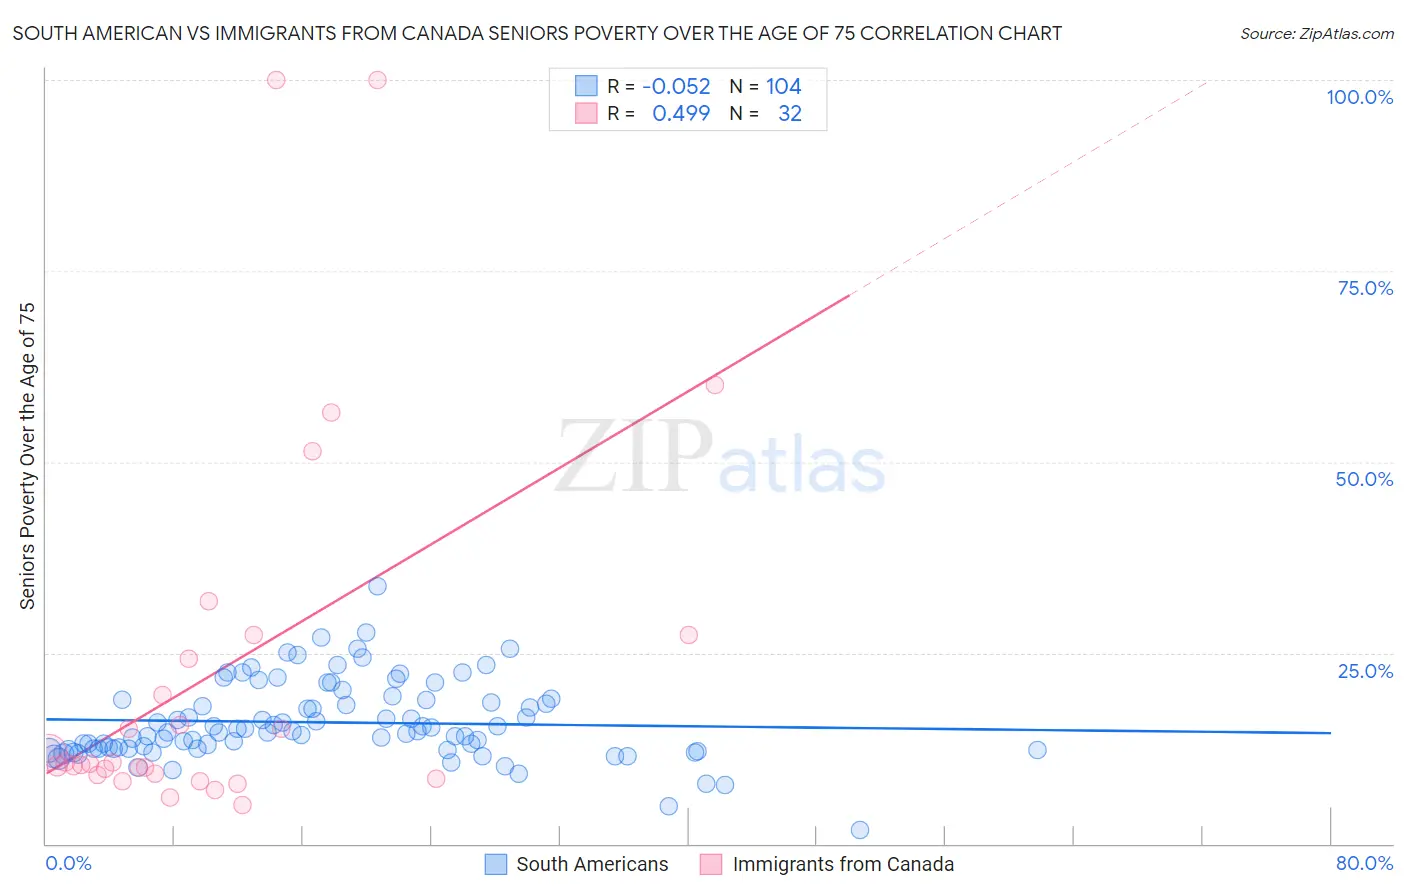 South American vs Immigrants from Canada Seniors Poverty Over the Age of 75